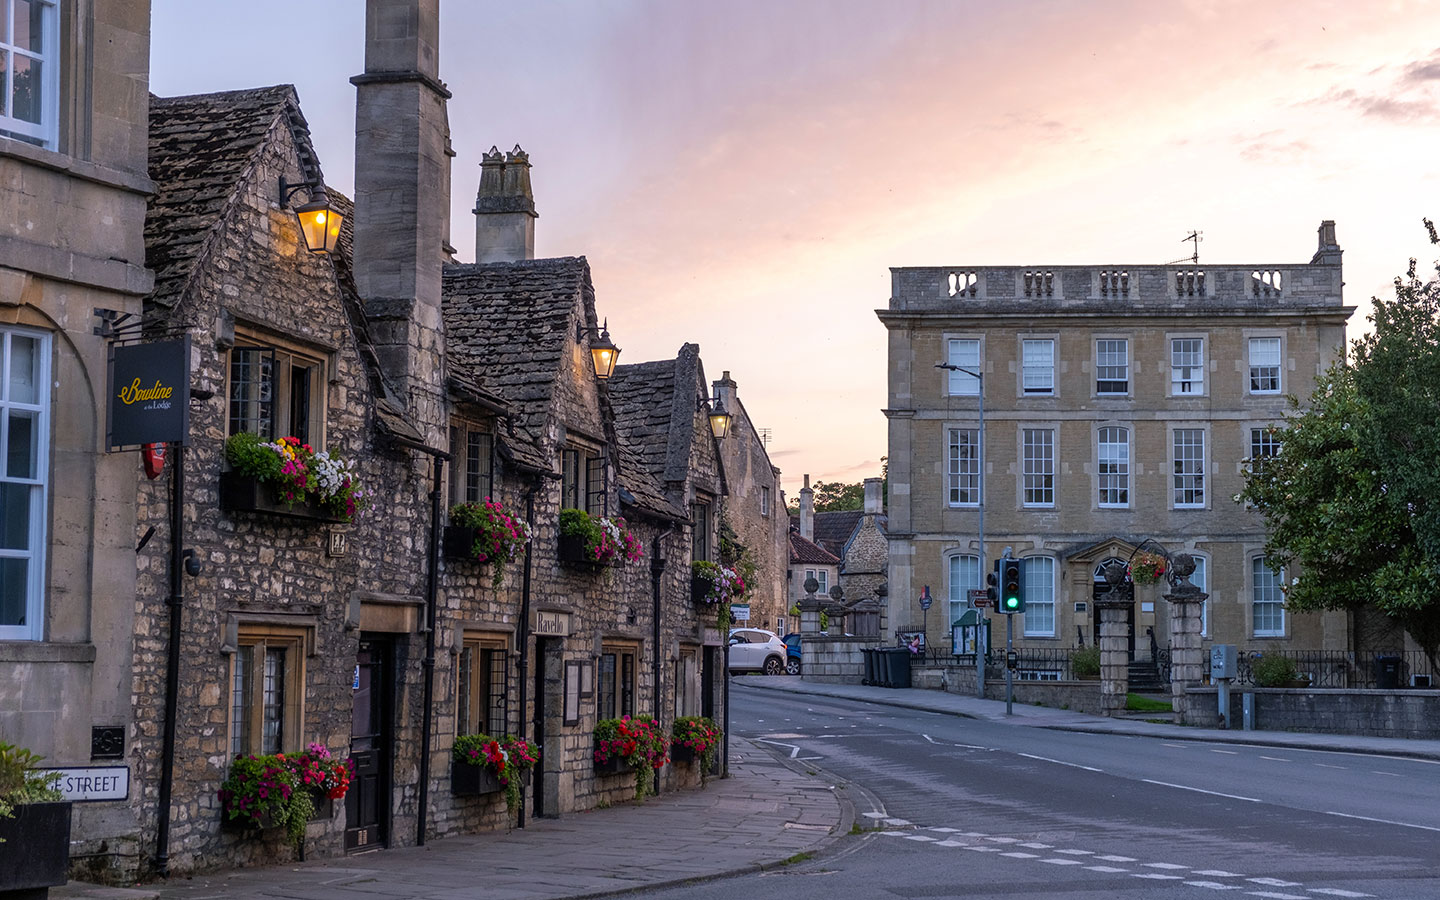 Things to do in Bradford on Avon: A local's guide